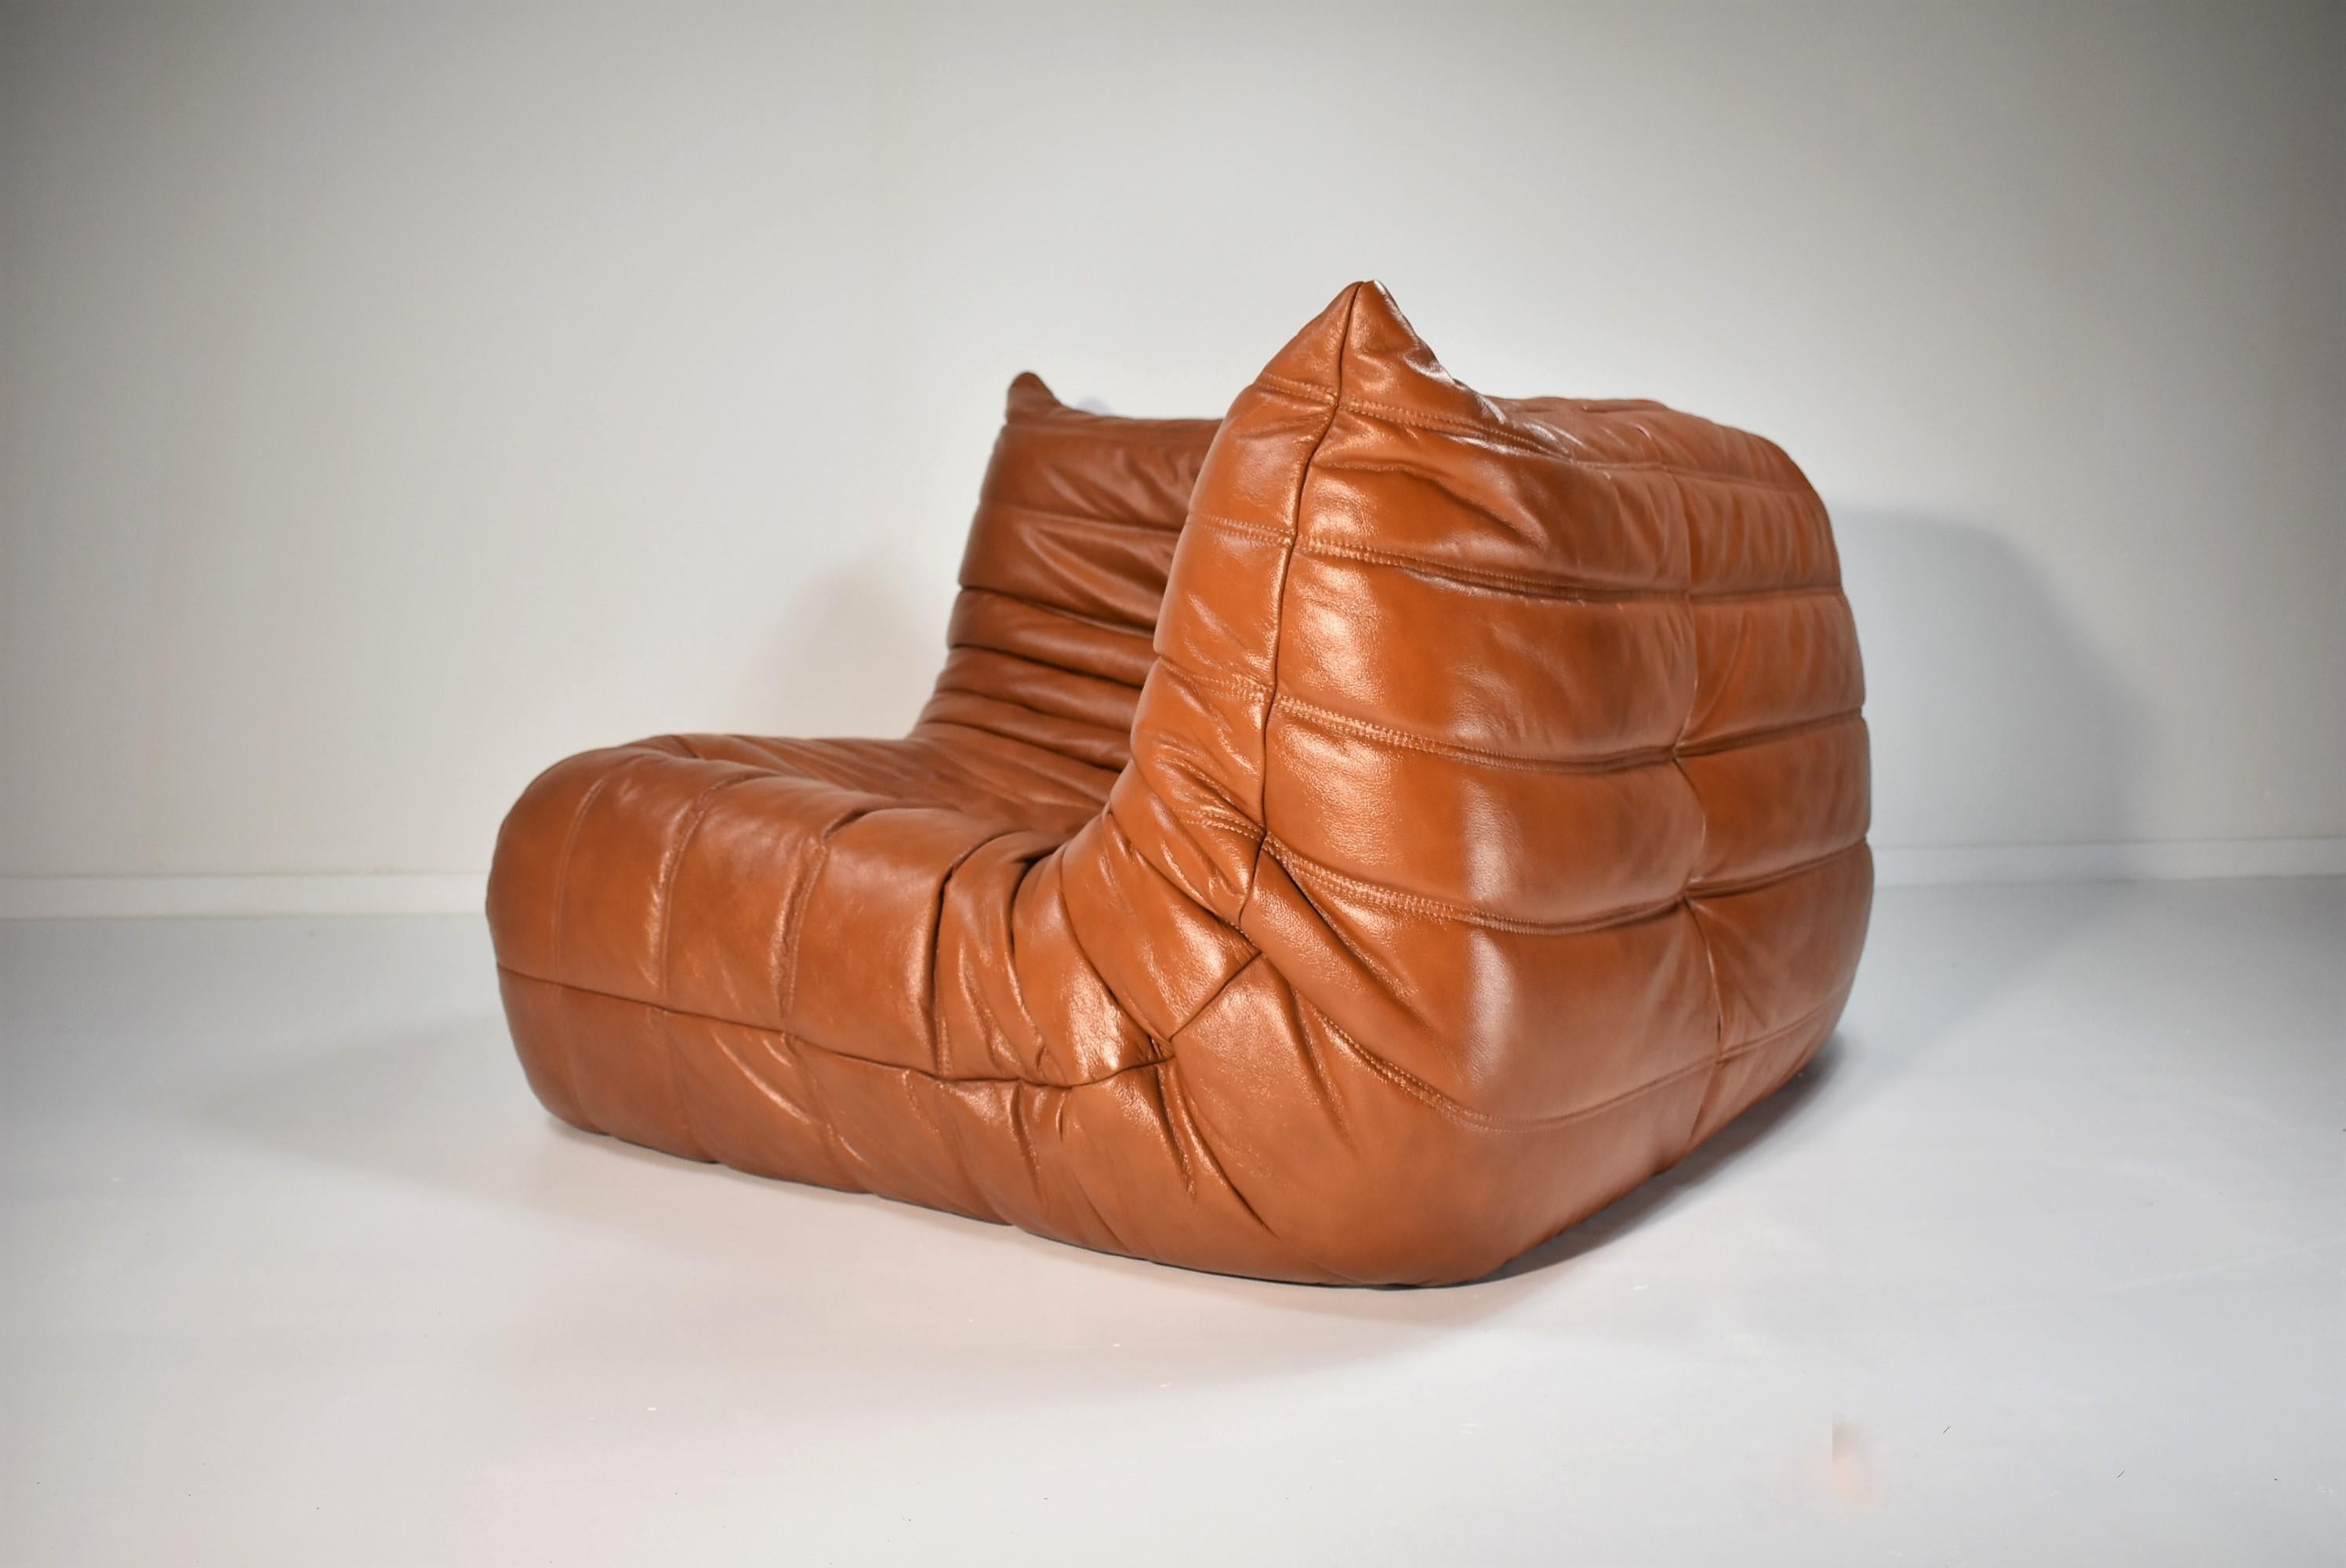 Late 20th Century French Togo Corner Seat in Brown/Orange Leather, Michel Ducaroy for Ligne Roset For Sale